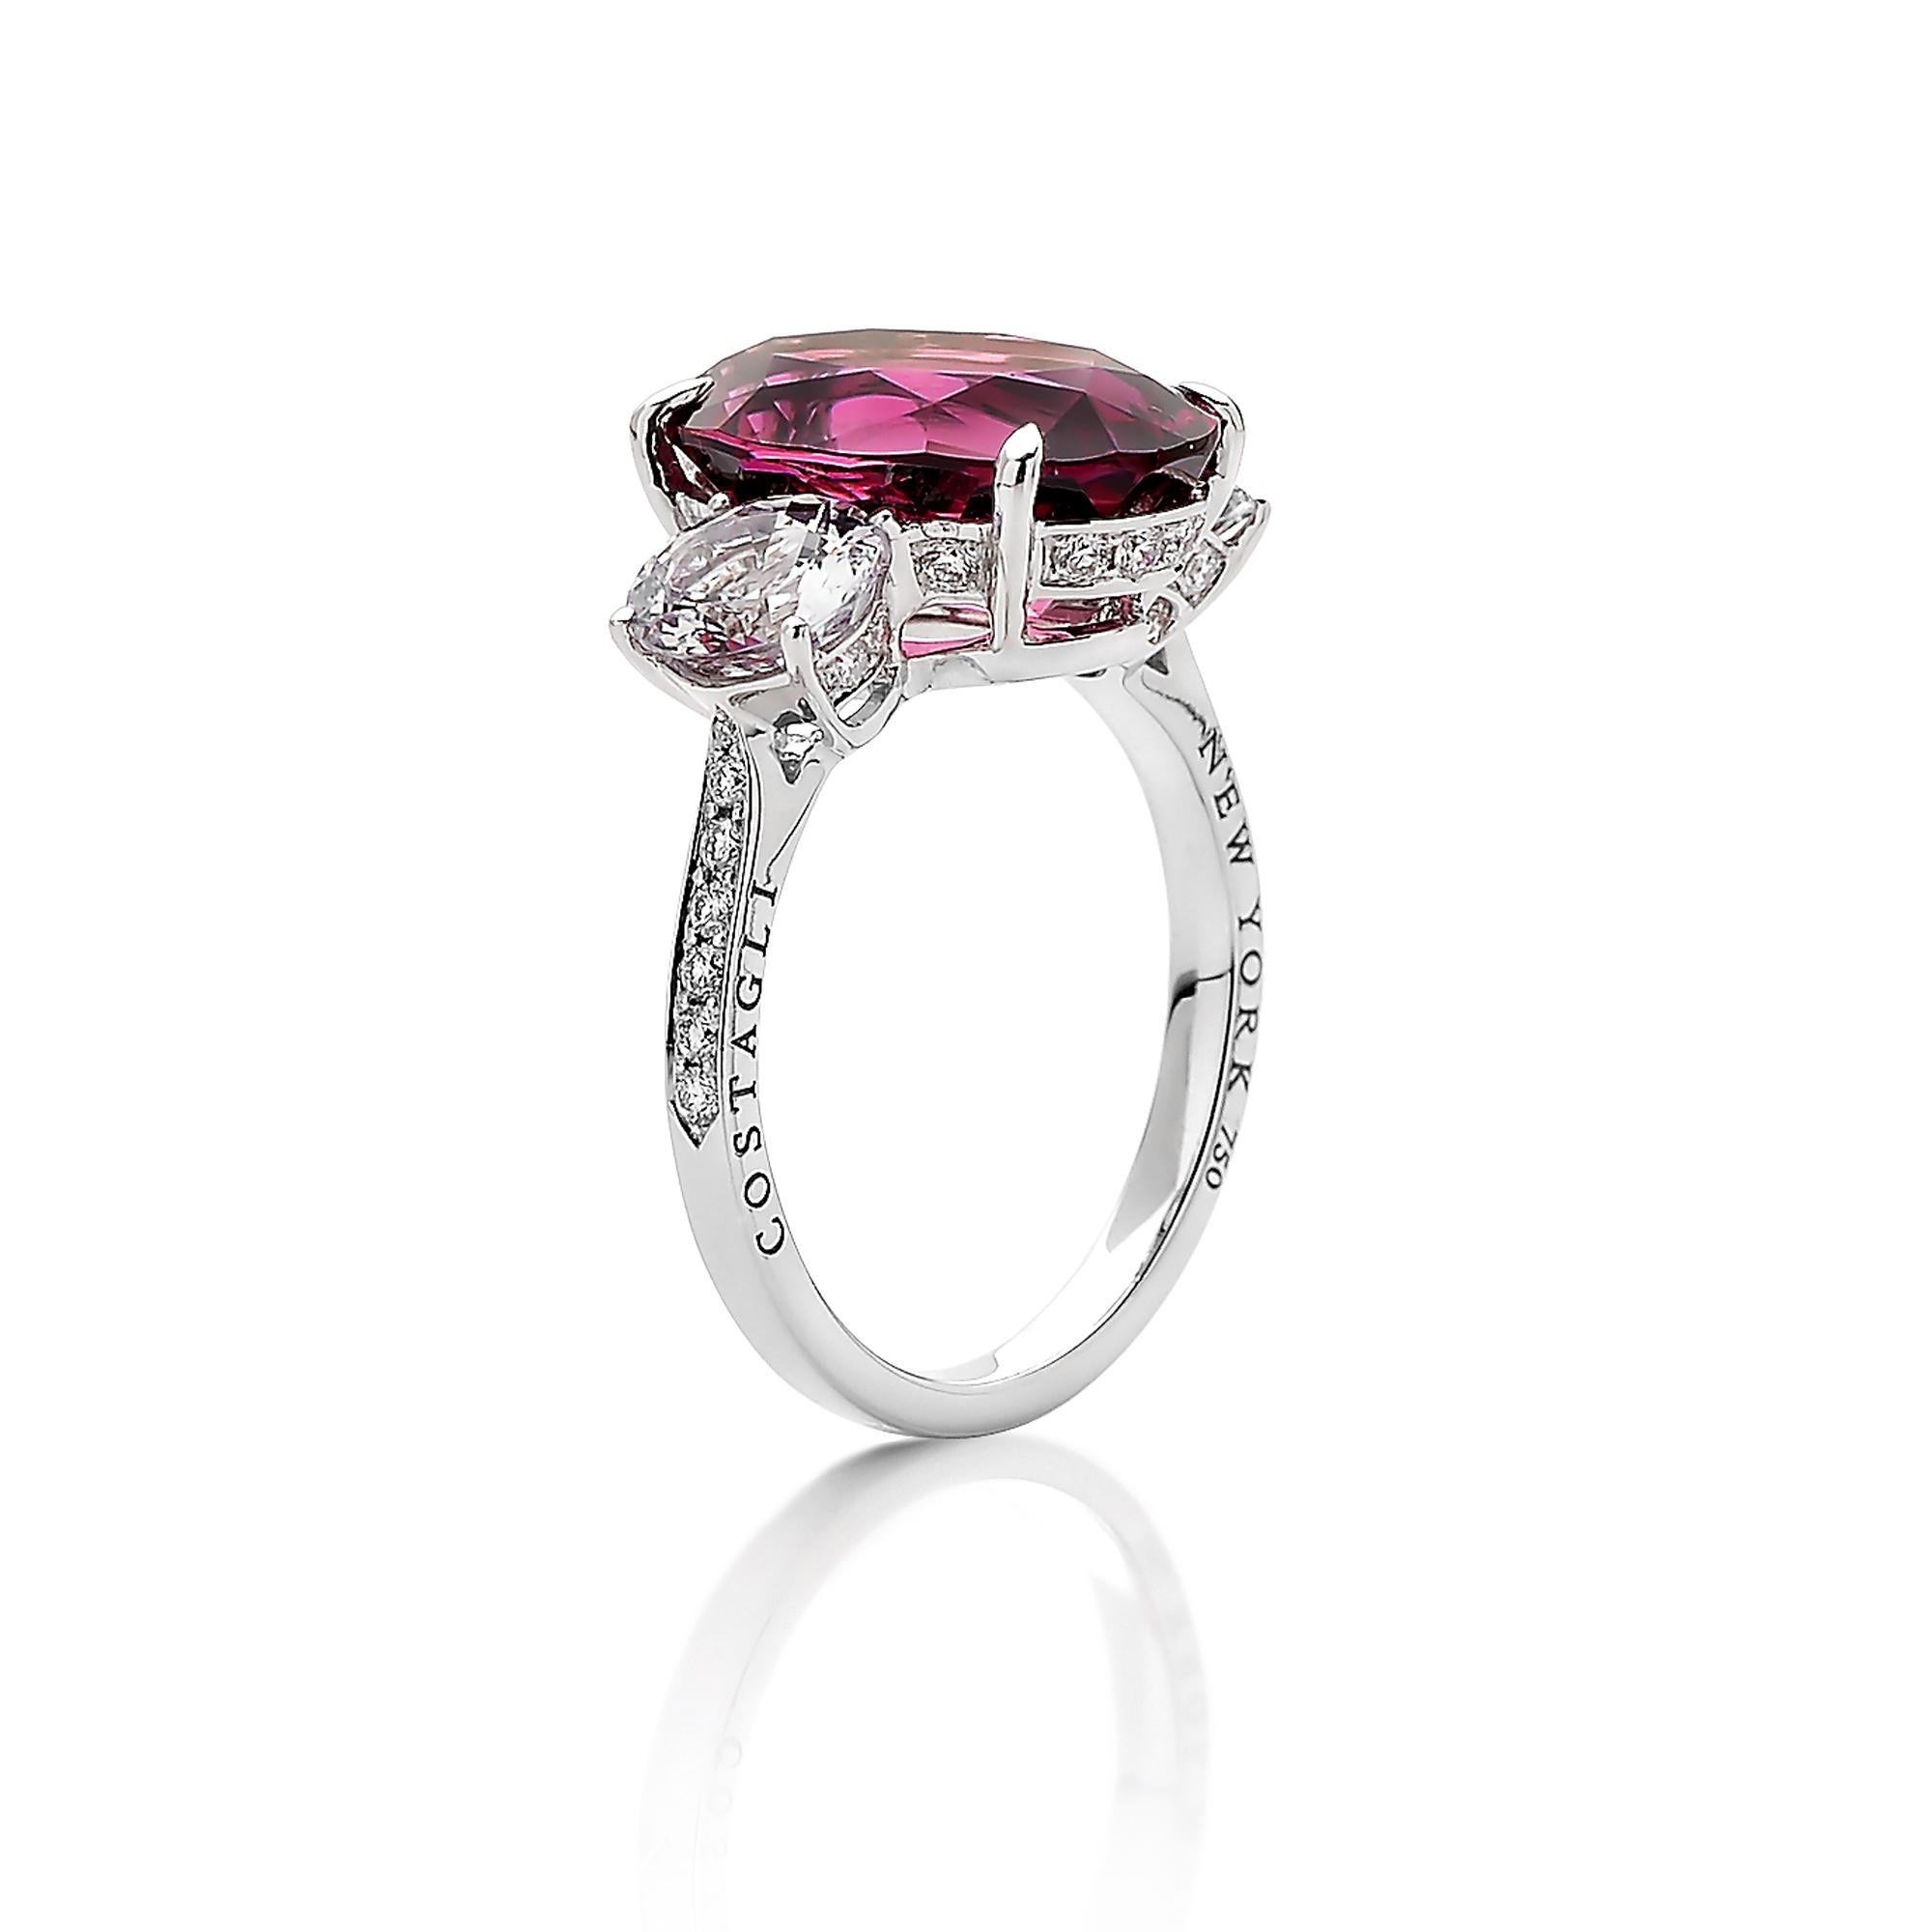 One of a kind 18 karat white gold oval-shape rhodolite garnet ring with white spinel side stones and pave-set round, brilliant diamonds. 

Each Paolo Costagli contemporary engagement ring is a one of a kind, handcrafted testament to your love story.